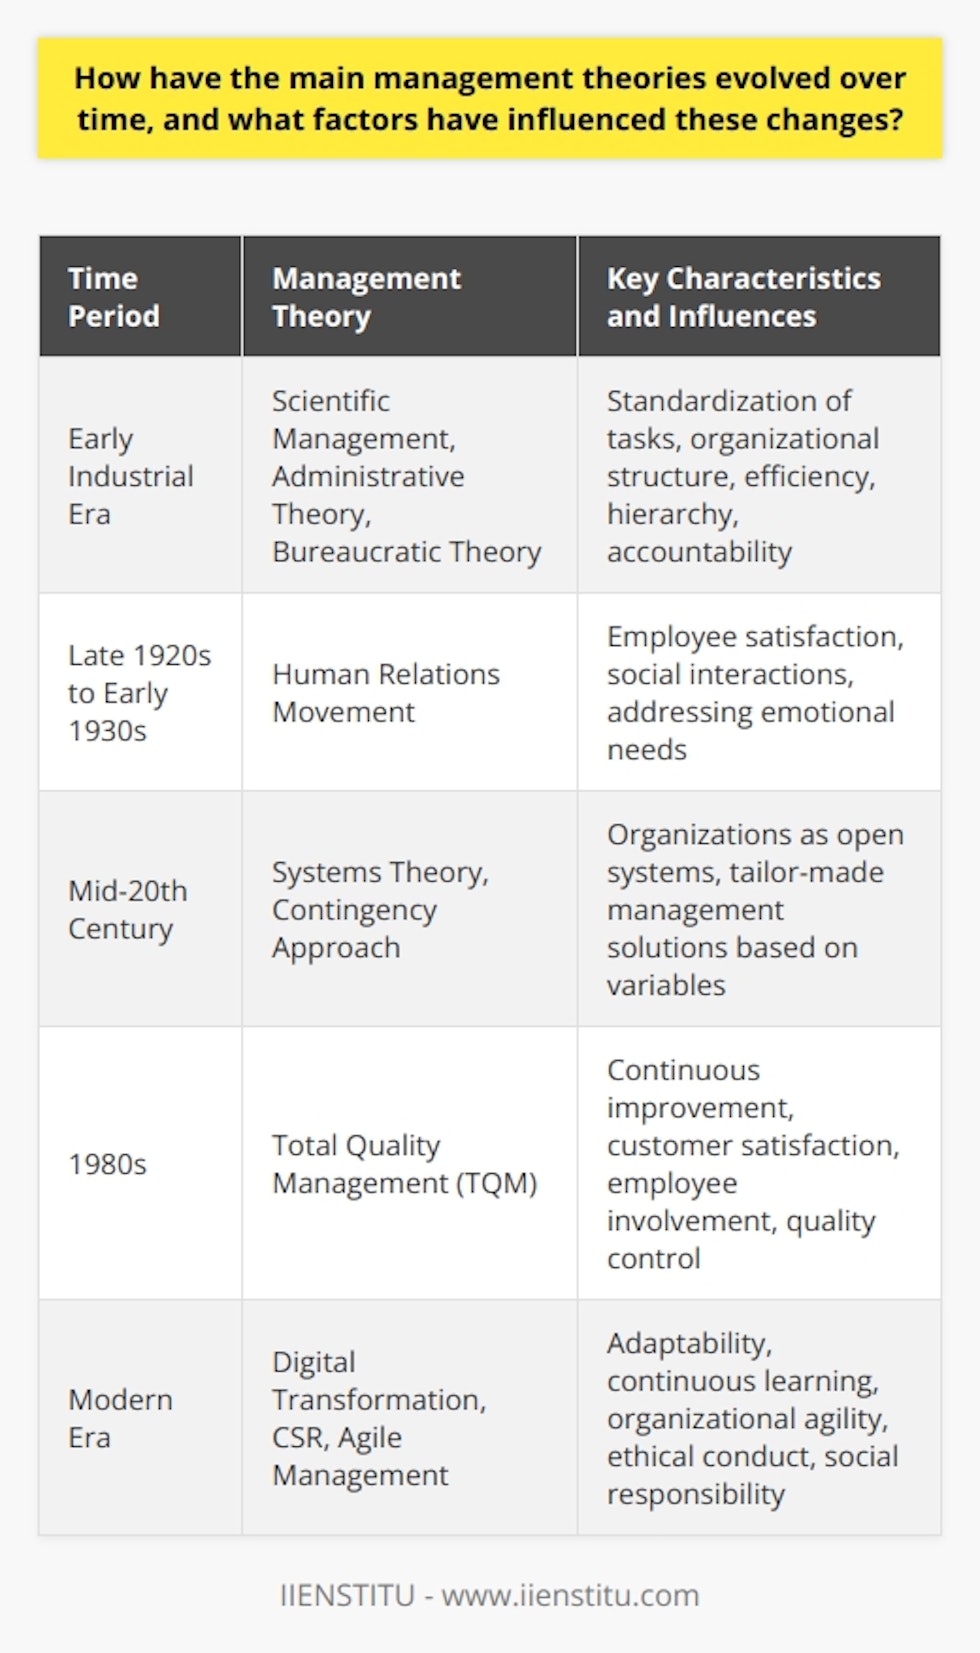 The evolution of management theories over the centuries is a fascinating reflection of societal developments and changing organizational needs. From the early industrial era to the modern digital age, the way managers think about their work and lead their teams has dramatically transformed.During the industrial revolution, Frederick Taylor introduced the concept of Scientific Management, aiming to enhance labor productivity by analyzing workflows and establishing standard procedures. Meanwhile, Henri Fayol's Administrative Theory focused on the broader principles of management and organizational structure, setting the groundwork for what became known as the five functions of management: planning, organizing, commanding, coordinating, and controlling. Simultaneously, Max Weber's Bureaucratic Theory emphasized a structured approach and hierarchy to ensure efficiency and accountability.However, as organizations grew and technology advanced, the rigidity of early theories showed limitations. The famed Hawthorne Studies, performed in the late 1920s and early 1930s, gave birth to the Human Relations Movement. It put forth the idea that employee satisfaction and informal relationships significantly impact productivity and advocated for management to address workers’ emotional needs.As the world moved past the mid-20th century, Systems Theory, brought into prominence by Ludwig von Bertalanffy, championed an understanding of organizations as open systems that interact with their environments. Contemporaneously, the Contingency Approach evolved, understanding that there is no one-size-fits-all in management – solutions must be contingent upon external and internal variables.The 1980s brought a surge of competitiveness and with it the Total Quality Management (TQM) movement. The core idea of TQM revolves around a commitment to improving customer satisfaction through continuous improvement and employee involvement. This period saw a strong emphasis on quality control and process optimization, reflecting broader economic pressures and international competition.Fast forwarding to modern times, management theories continue to reflect contemporary challenges and innovations. Digital transformation, the rise of AI and automation, demographic shifts, remote work, and the sustainability agenda have all influenced current management perspectives. Thought leaders have stressed the importance of organizational agility, adaptability, and fostering a culture of continuous learning and improvement—principles that are crucial for navigating today's complex, fast-paced business environment.Amidst these transitions, the introduction of concepts such as Corporate Social Responsibility (CSR) has changed the relationship between businesses and society. The idea that organizations should act in the best interests of society, not just shareholders, has taken root. This reflects a broader cultural shift towards sustainability, ethical conduct, and social impact.In conclusion, through each stage of its evolution, management theory has been shaped by technological advancements, economic shifts, and social change. As it moves forward, it will continue to adapt, reflecting both the resilience and the innovative spirit of the organizations and leaders it aims to guide.